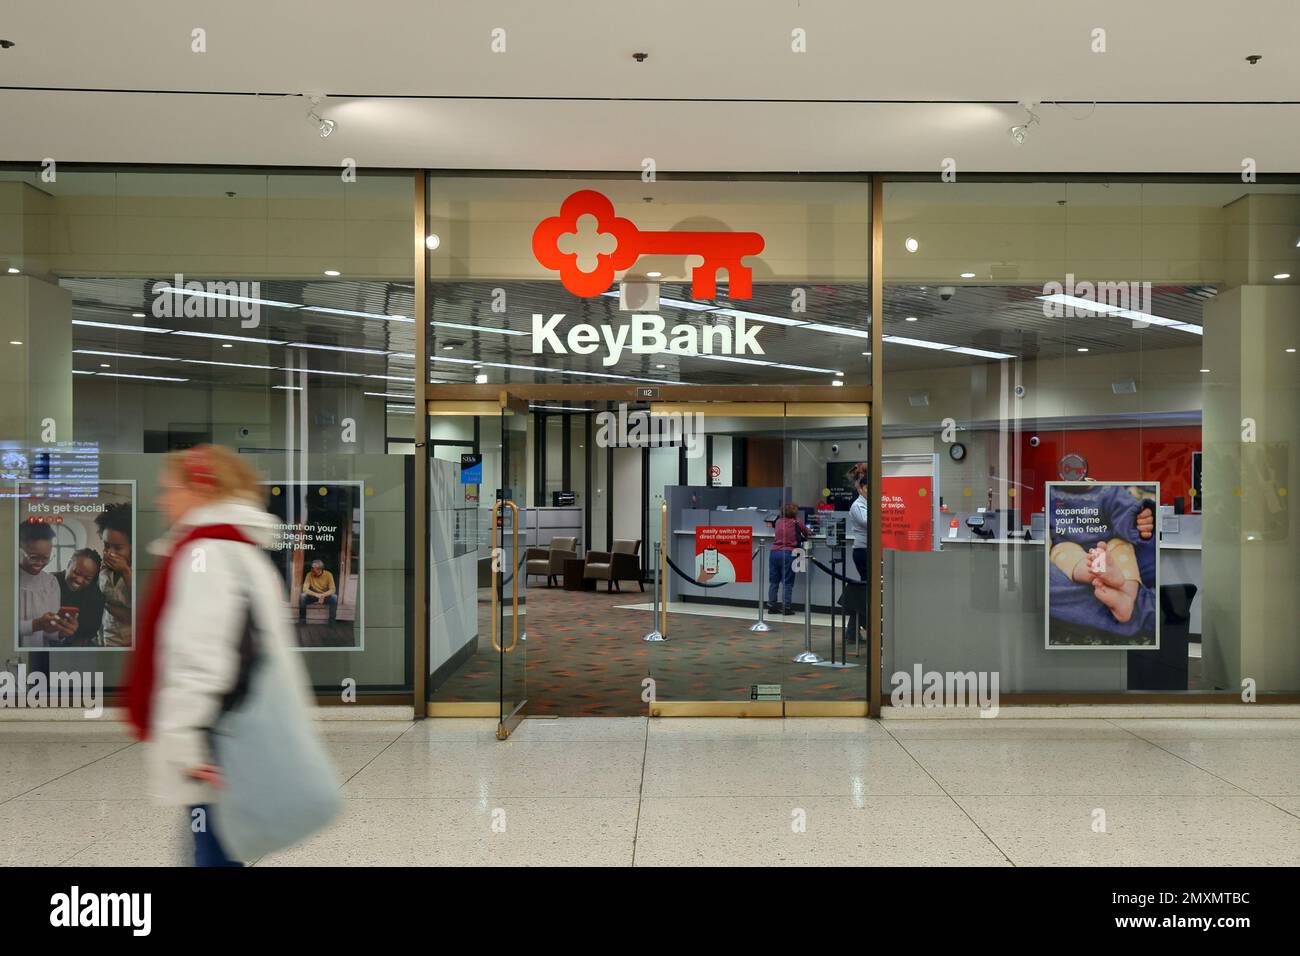 A person walks past a KeyBank bank branch in Albany, New York. Stock Photo